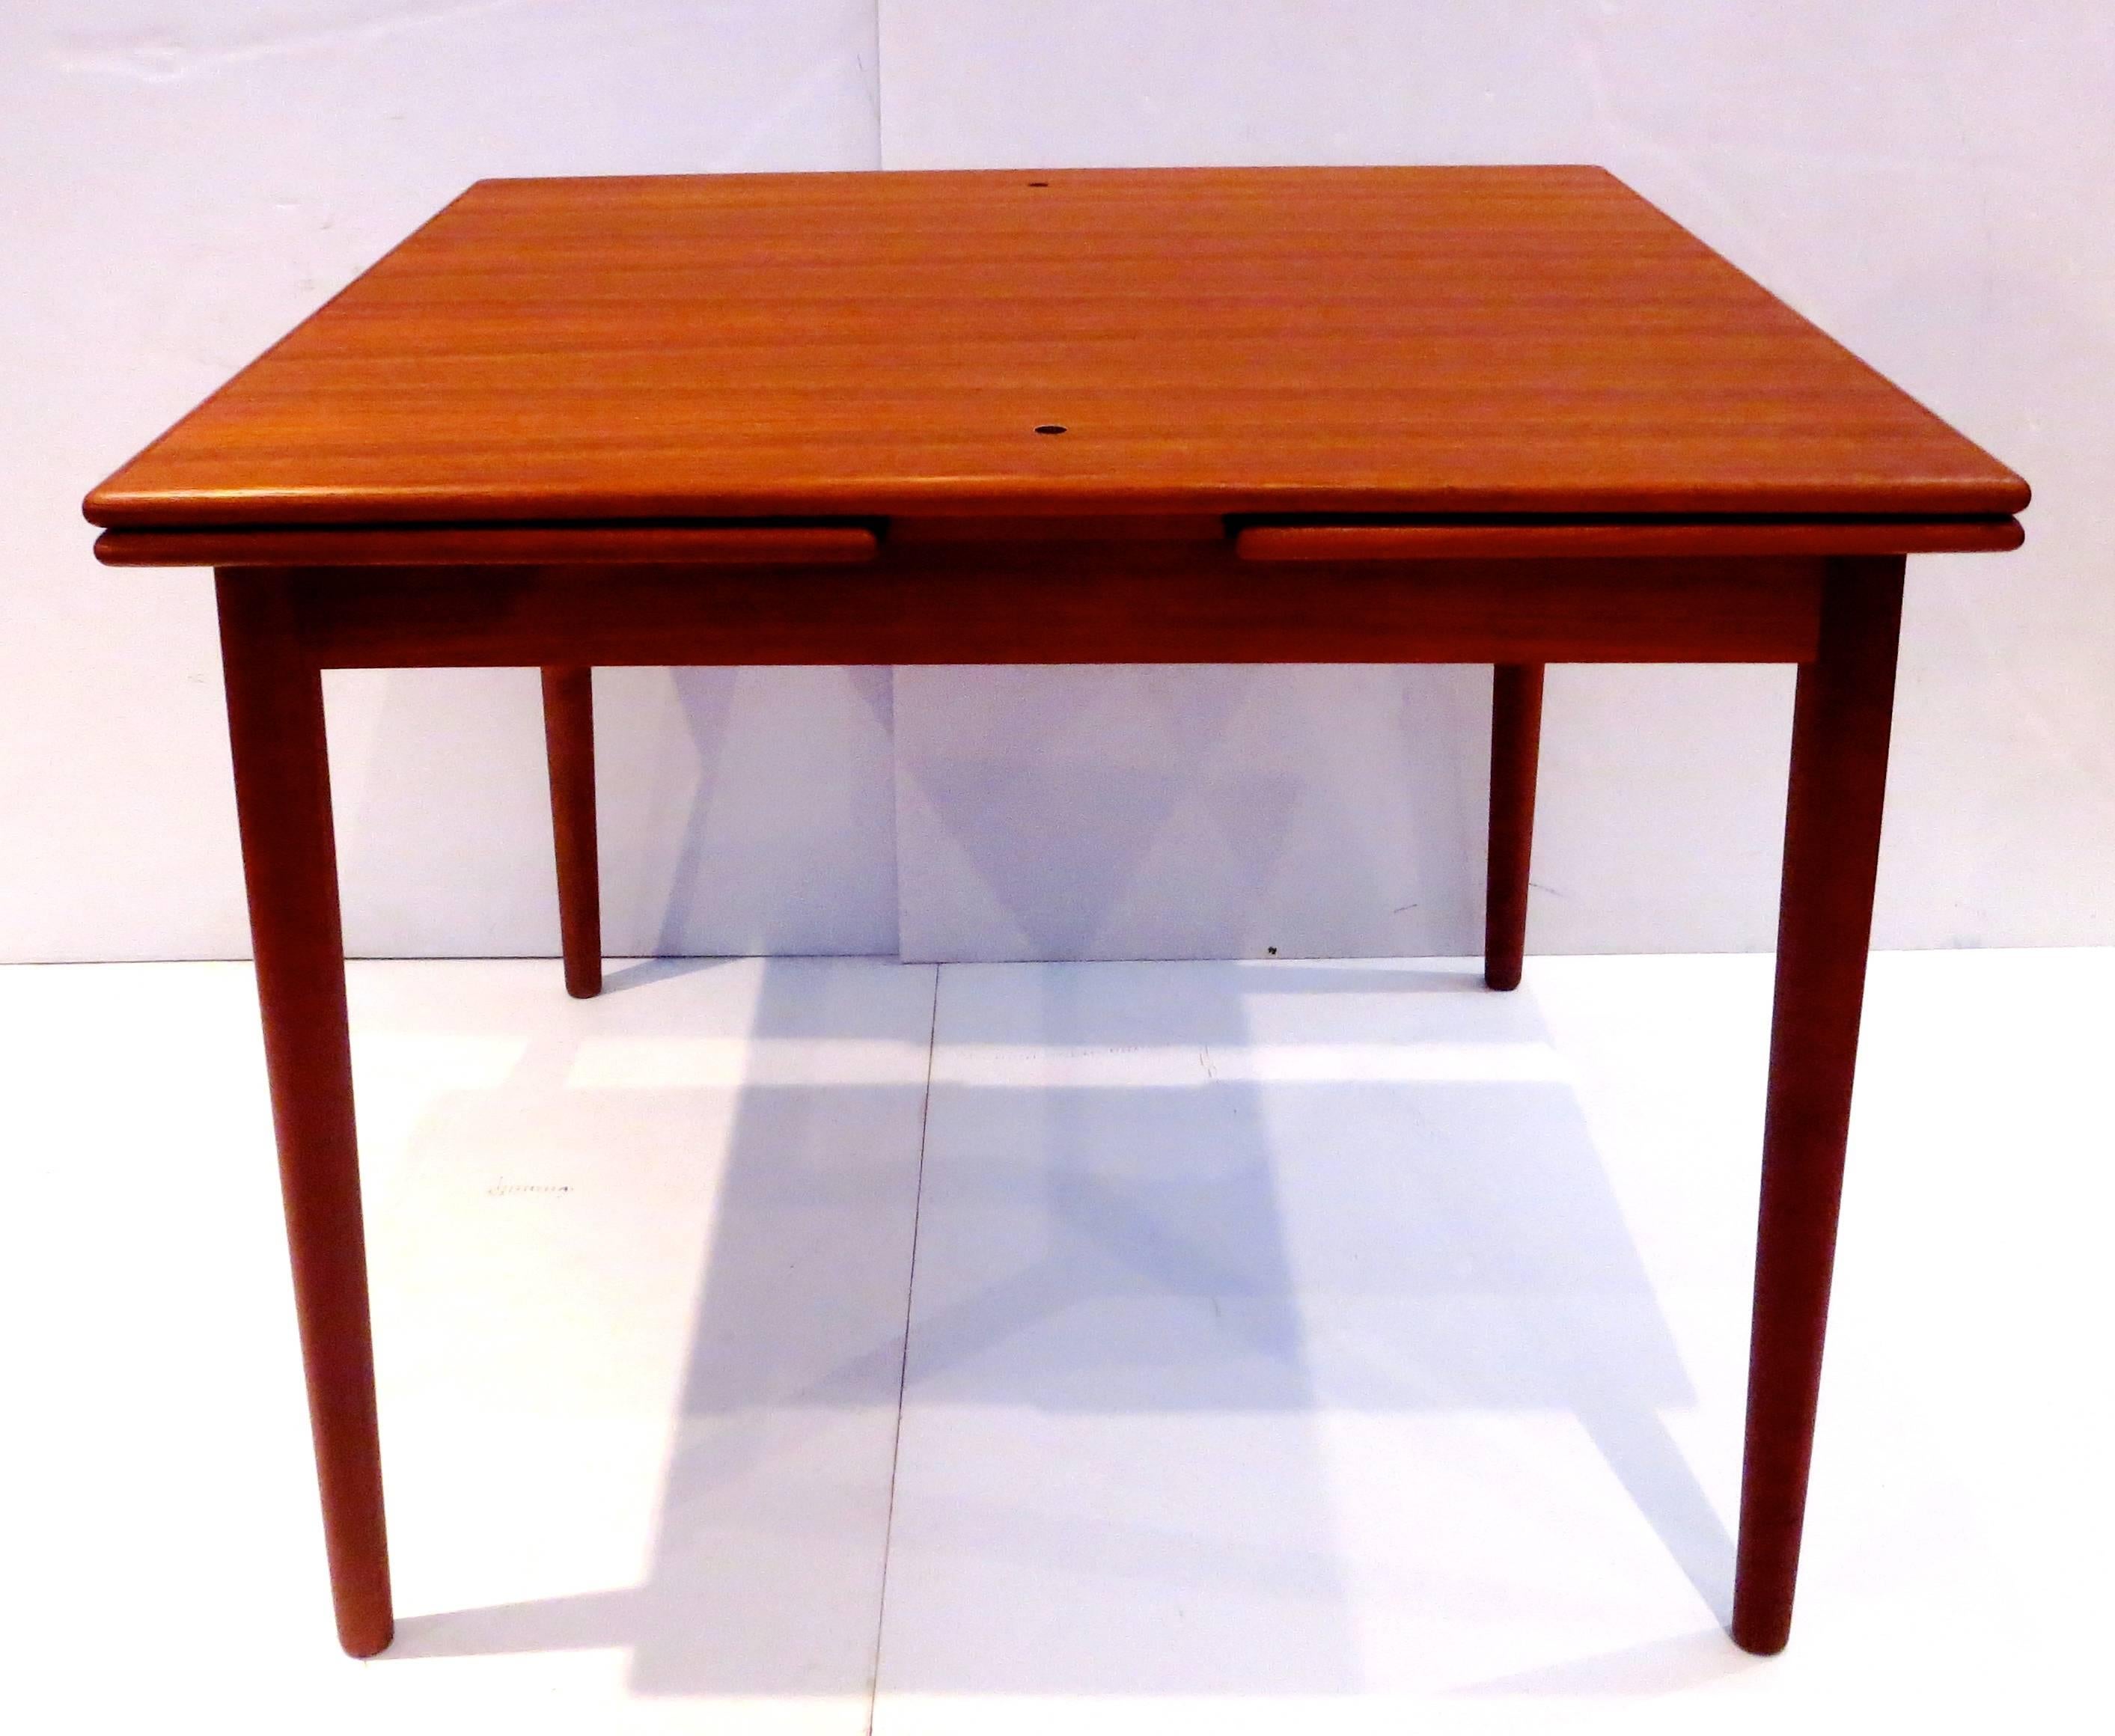 Unique Danish Modern teak table with reversible flip top and two hidden sliding extensions. Excellent design with multi-use. The top flips over and becomes a game table with a black leather surface. Has the original label and comes with the Danish